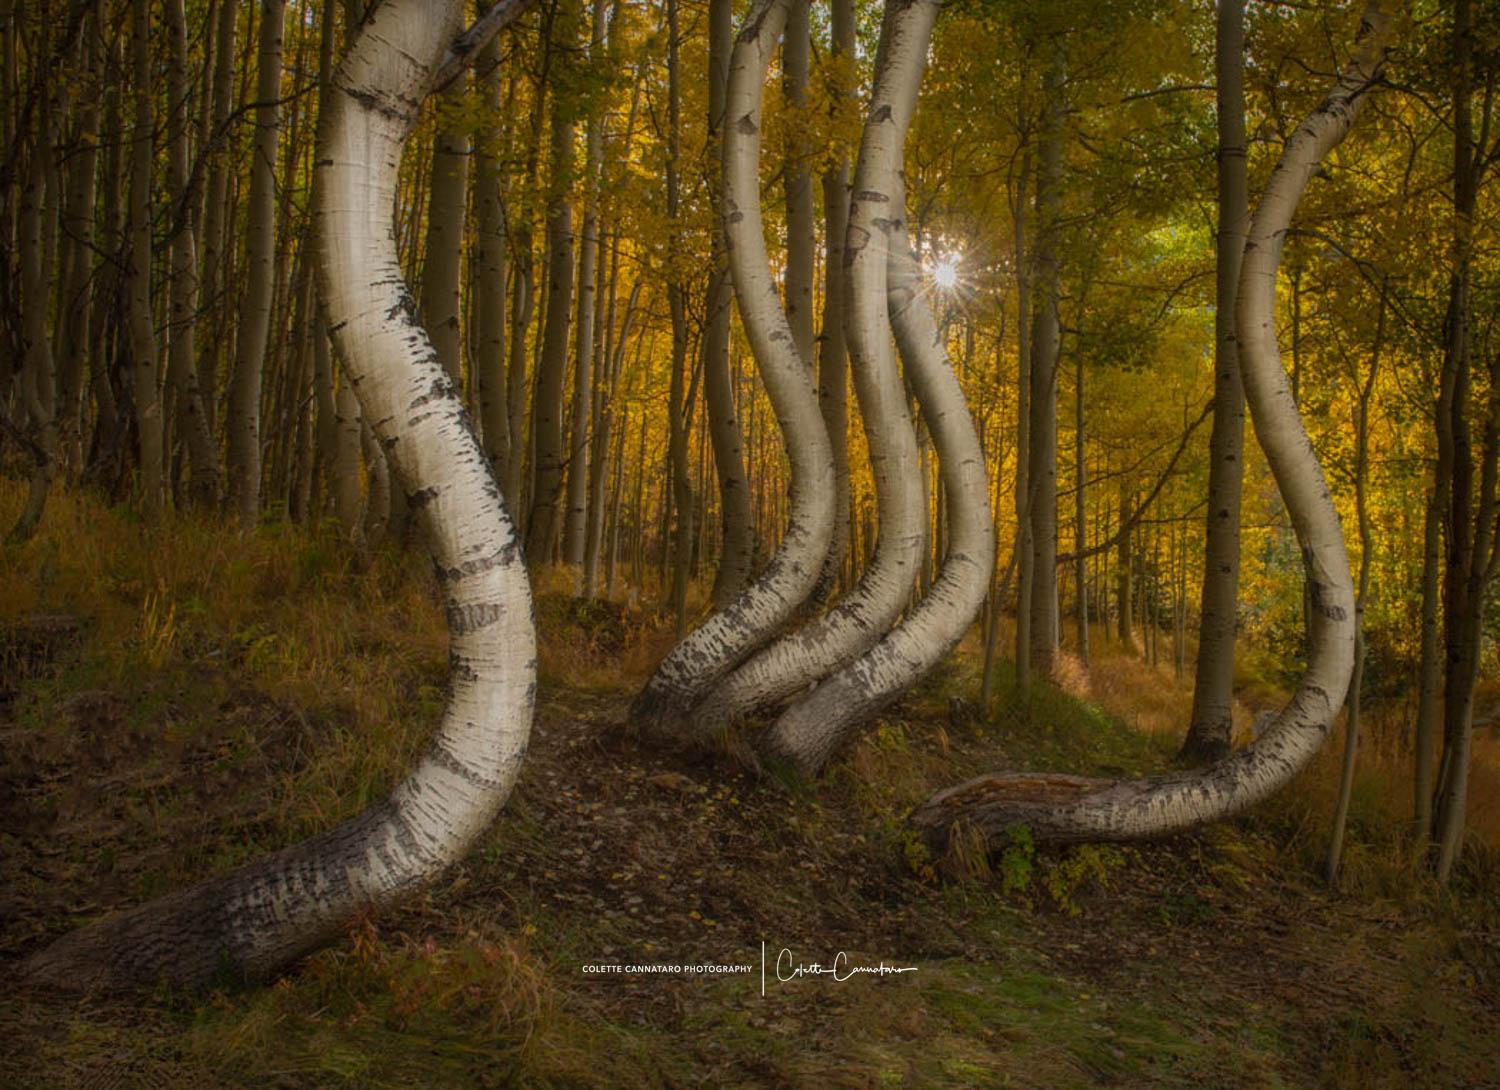 These curvy aspen trees in Colorado seem to be dancing to their own beat!